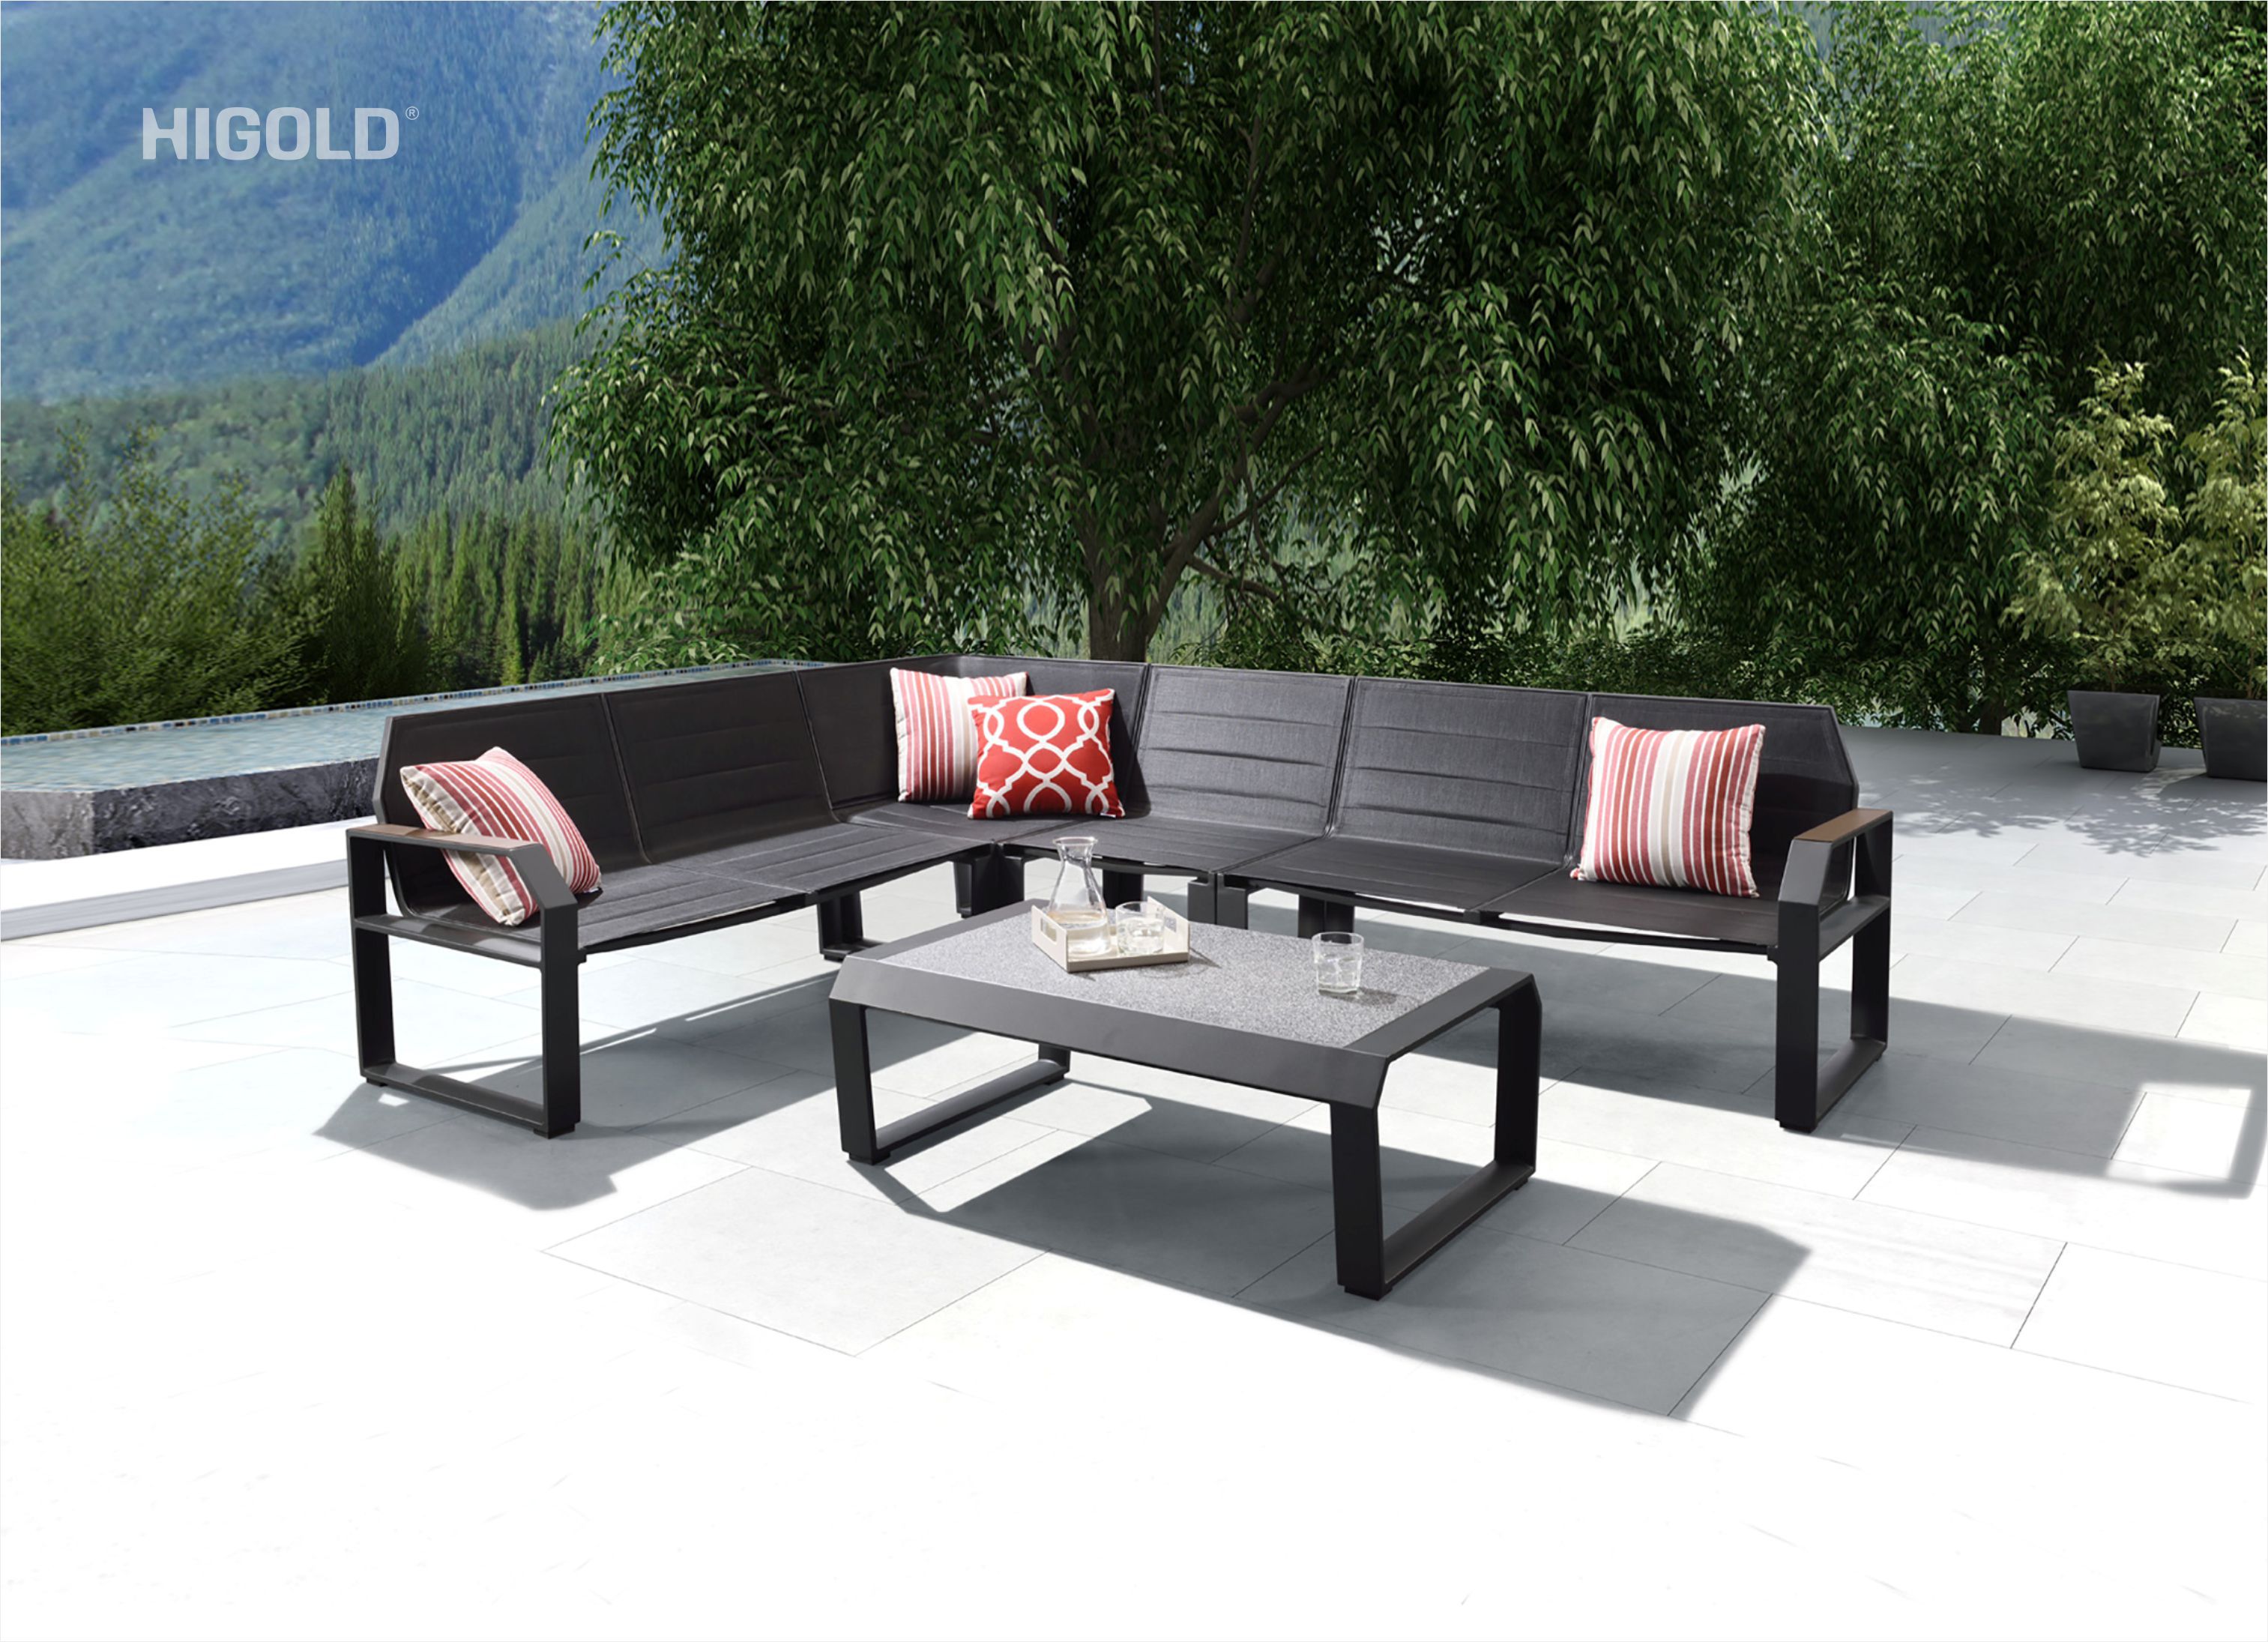 Nomad outdoor chaise lounge set of 2